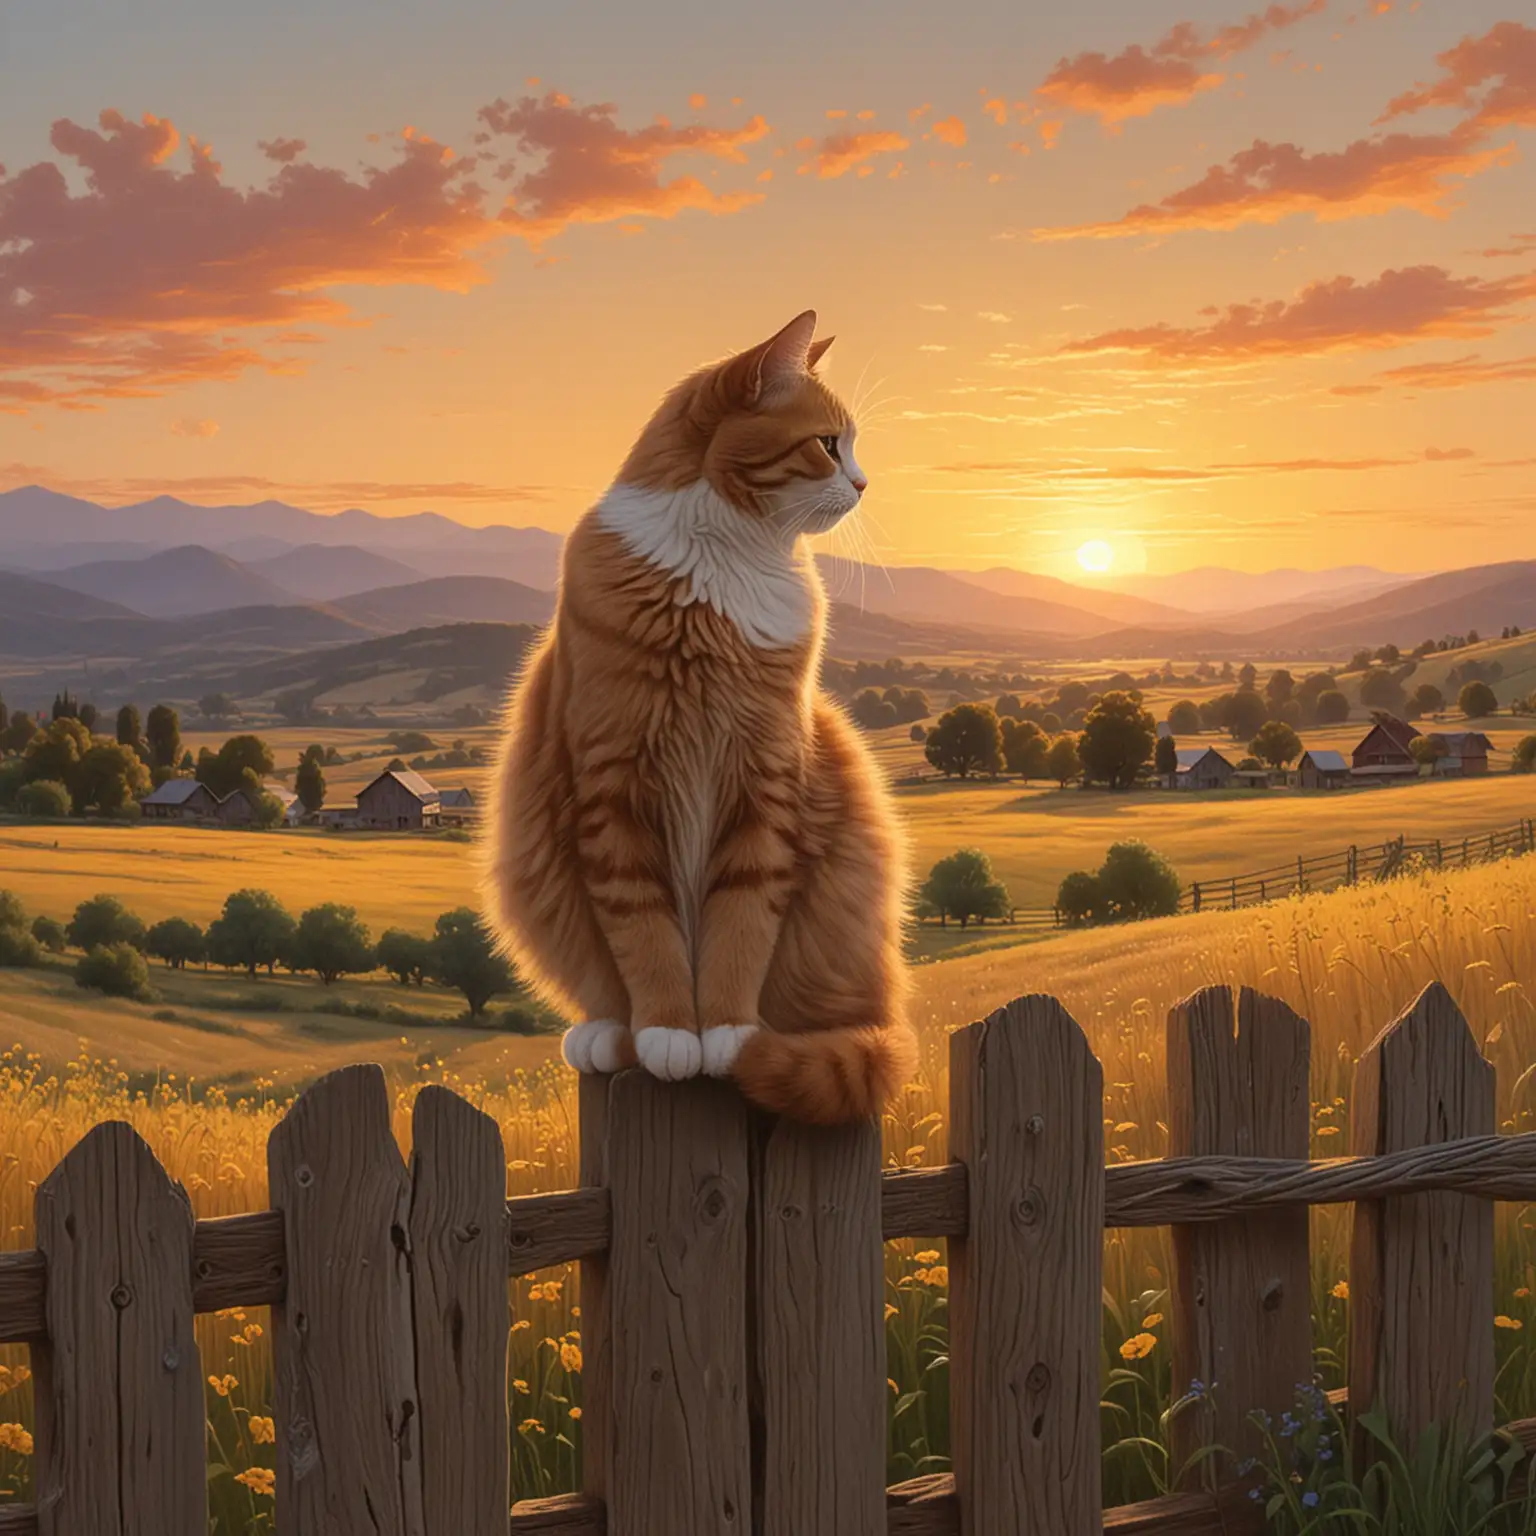 Tranquil Countryside Scene Adorable Cat on Wooden Fence at Sunset